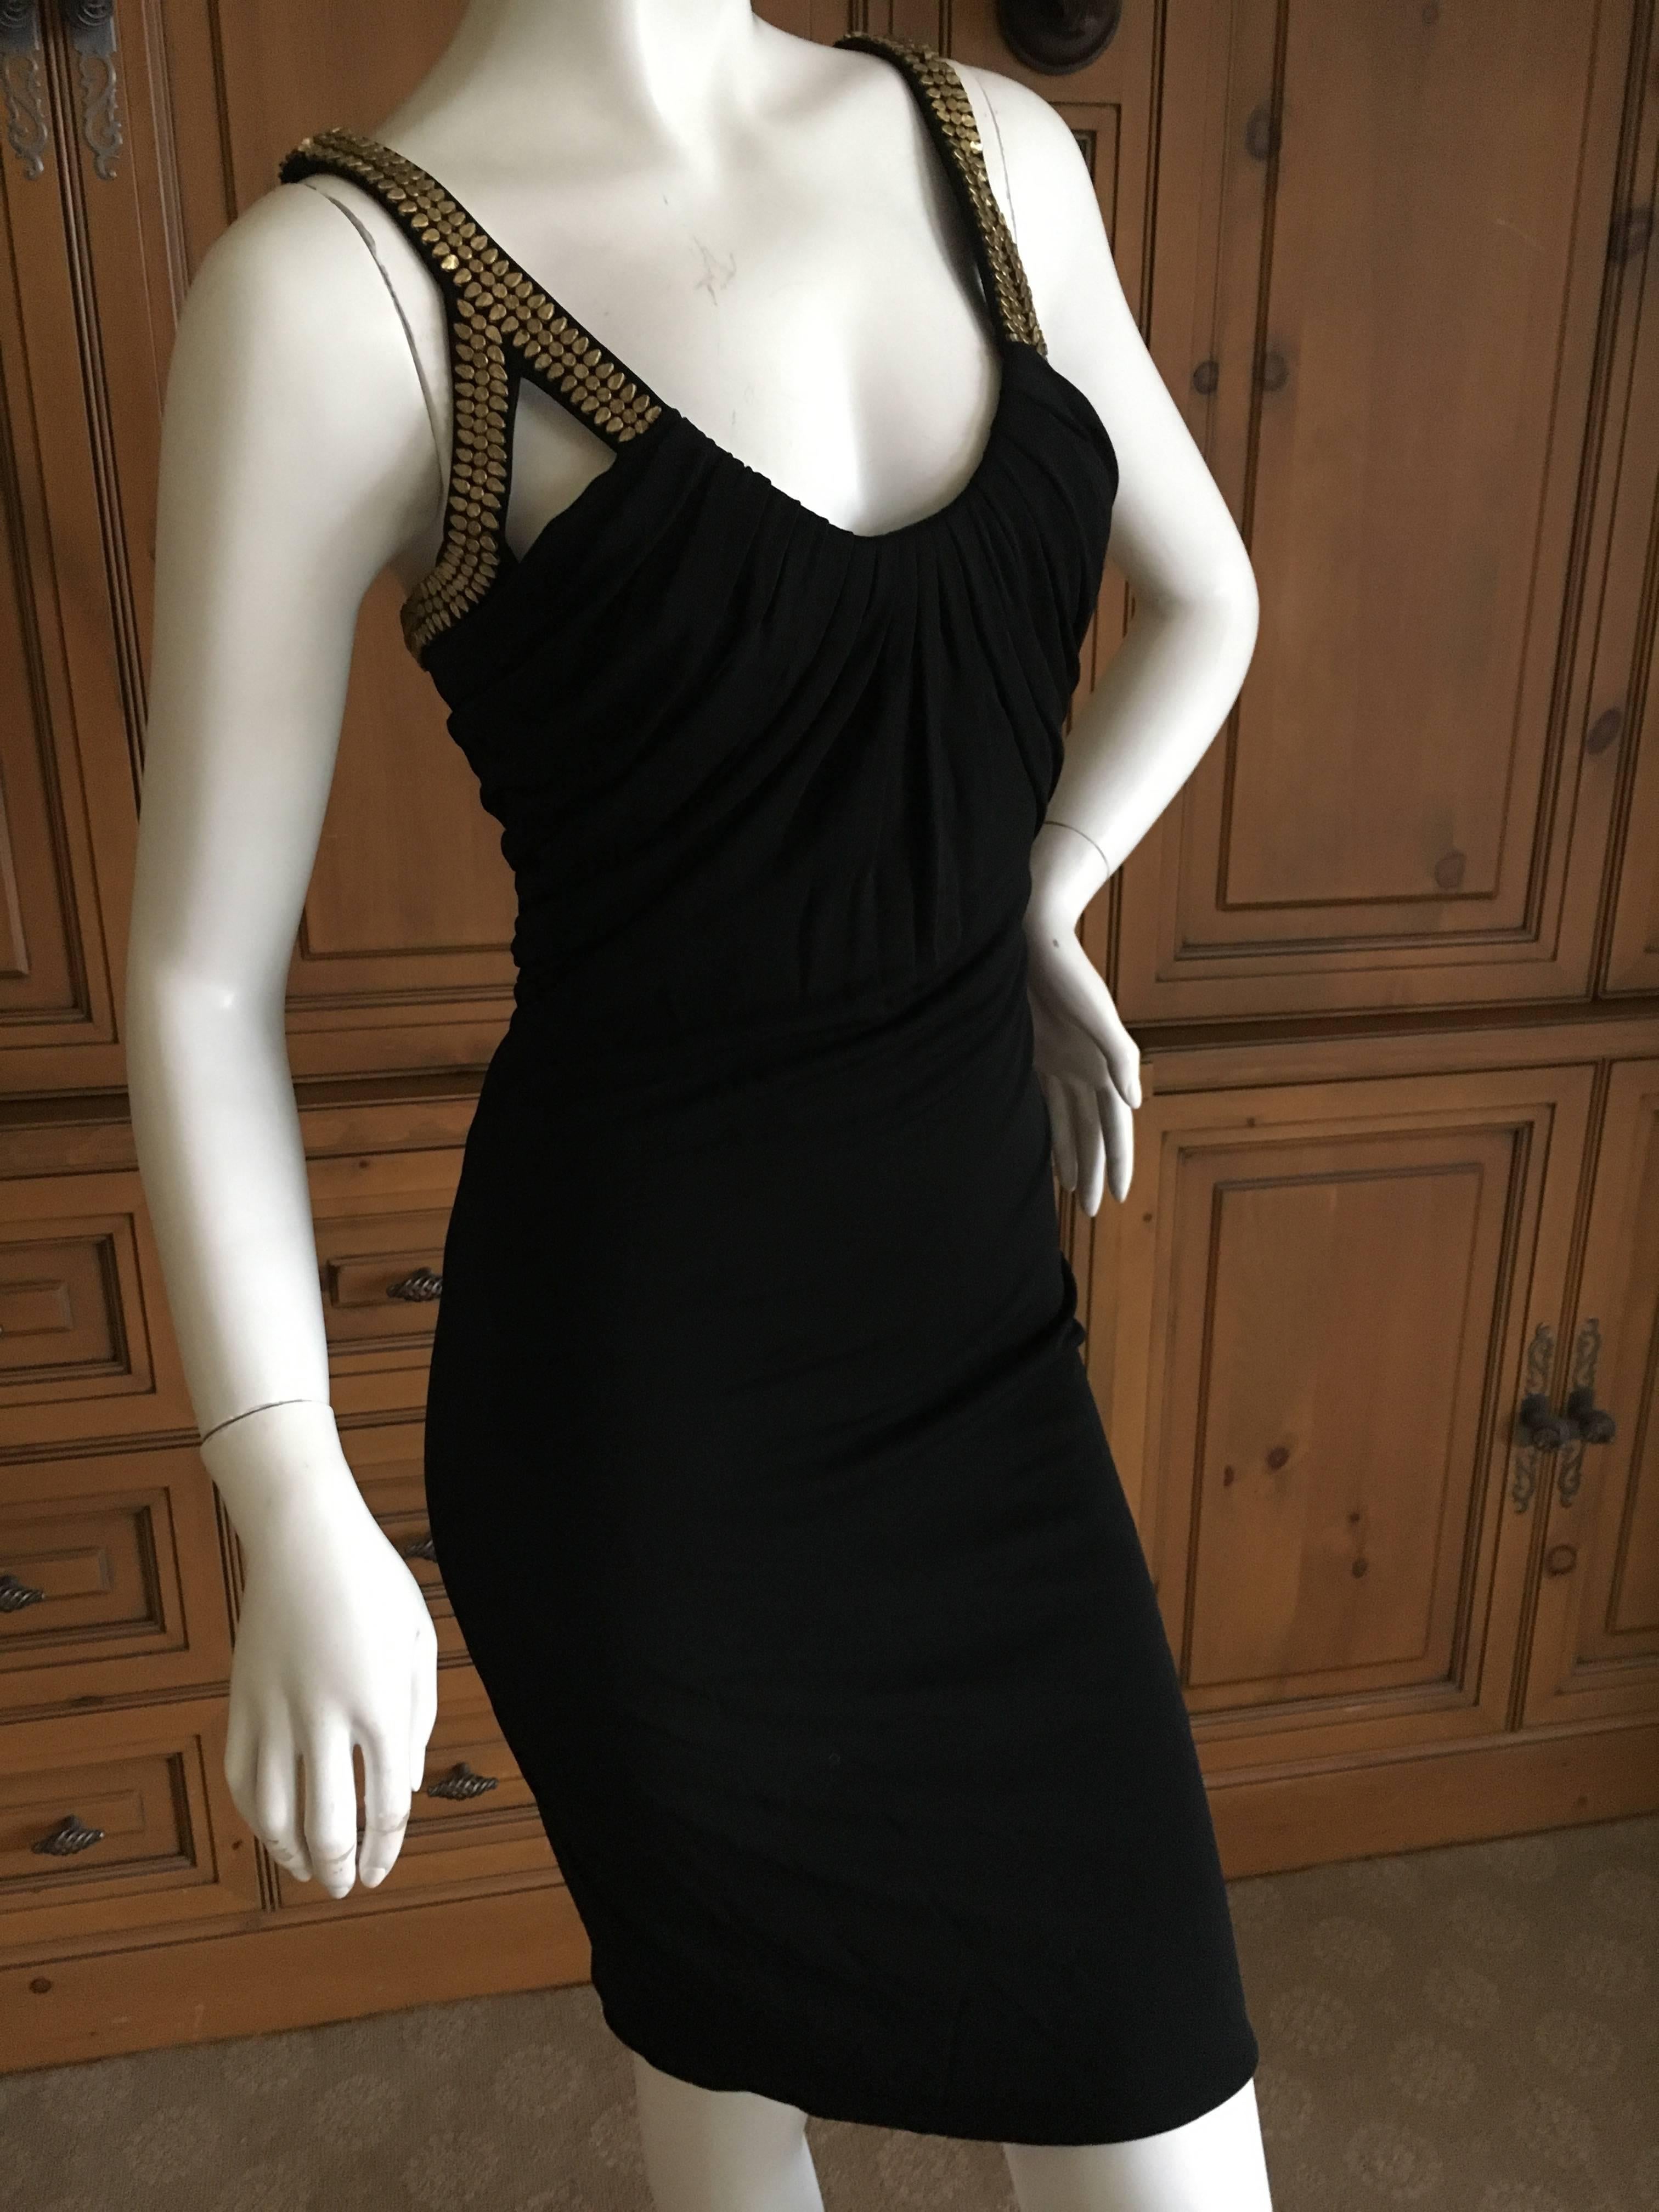 Women's Versace Vintage Black Cocktail Dress with Gold Studded Accents For Sale